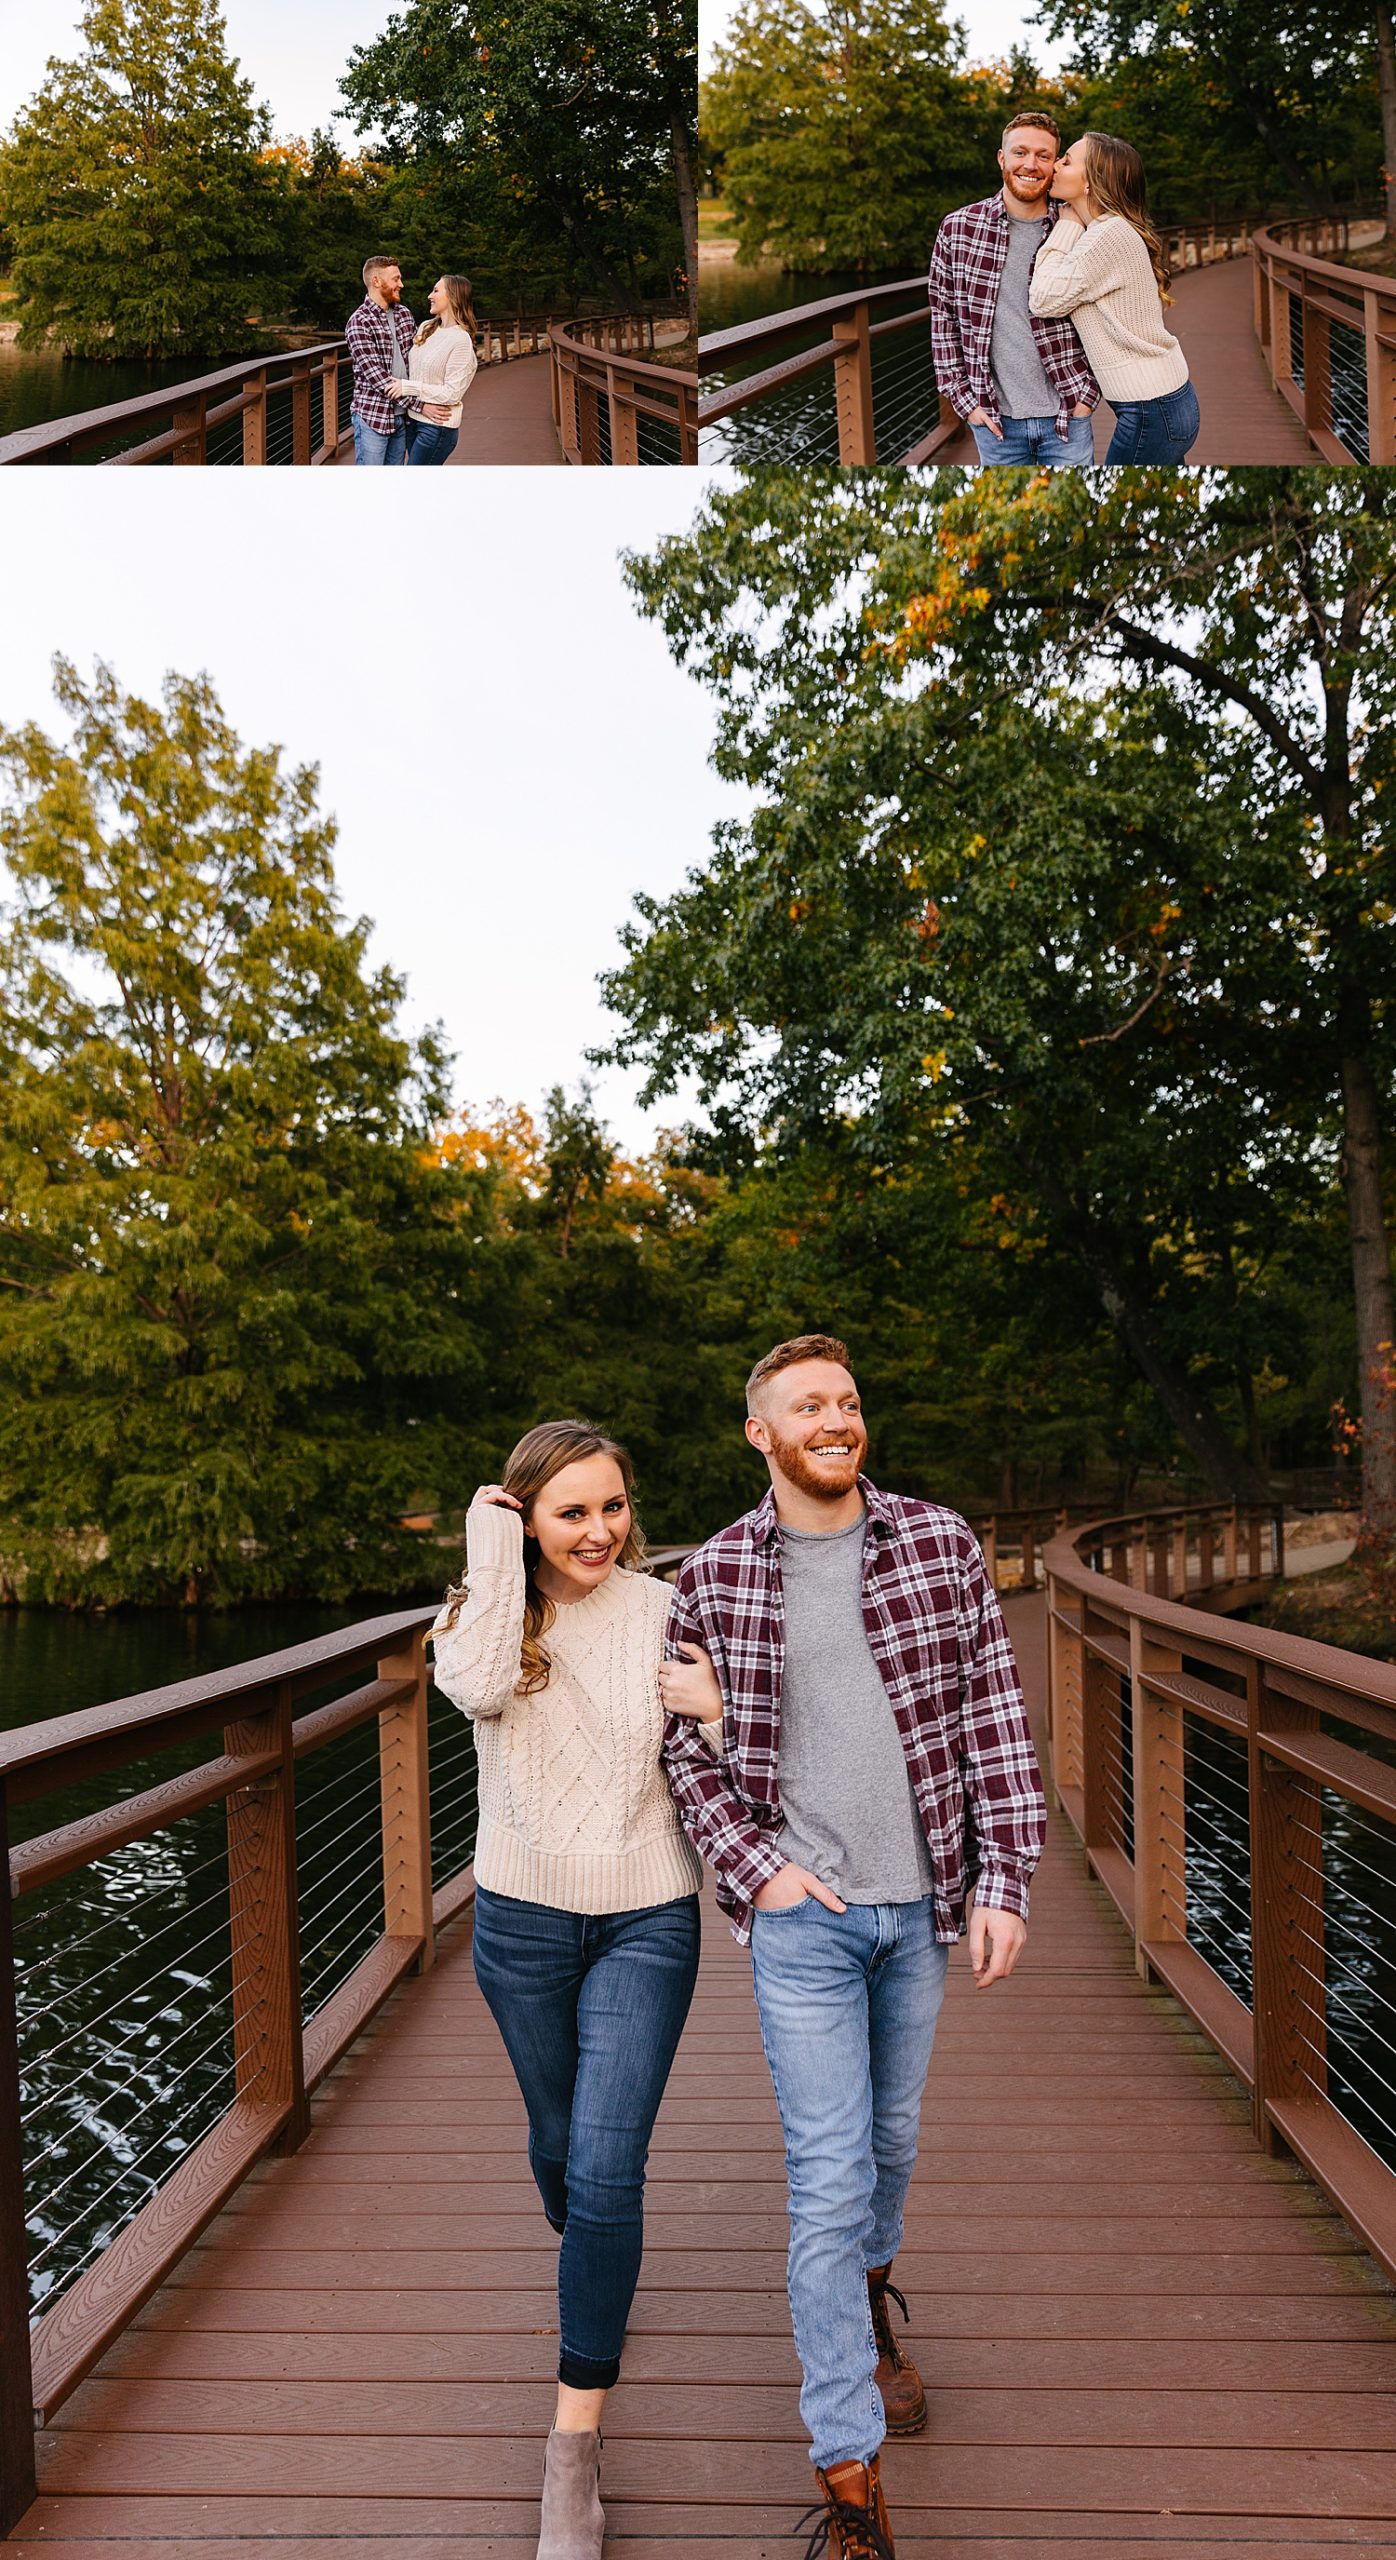 Fall engagement session in Kansas City at Park walking across bridge with couple